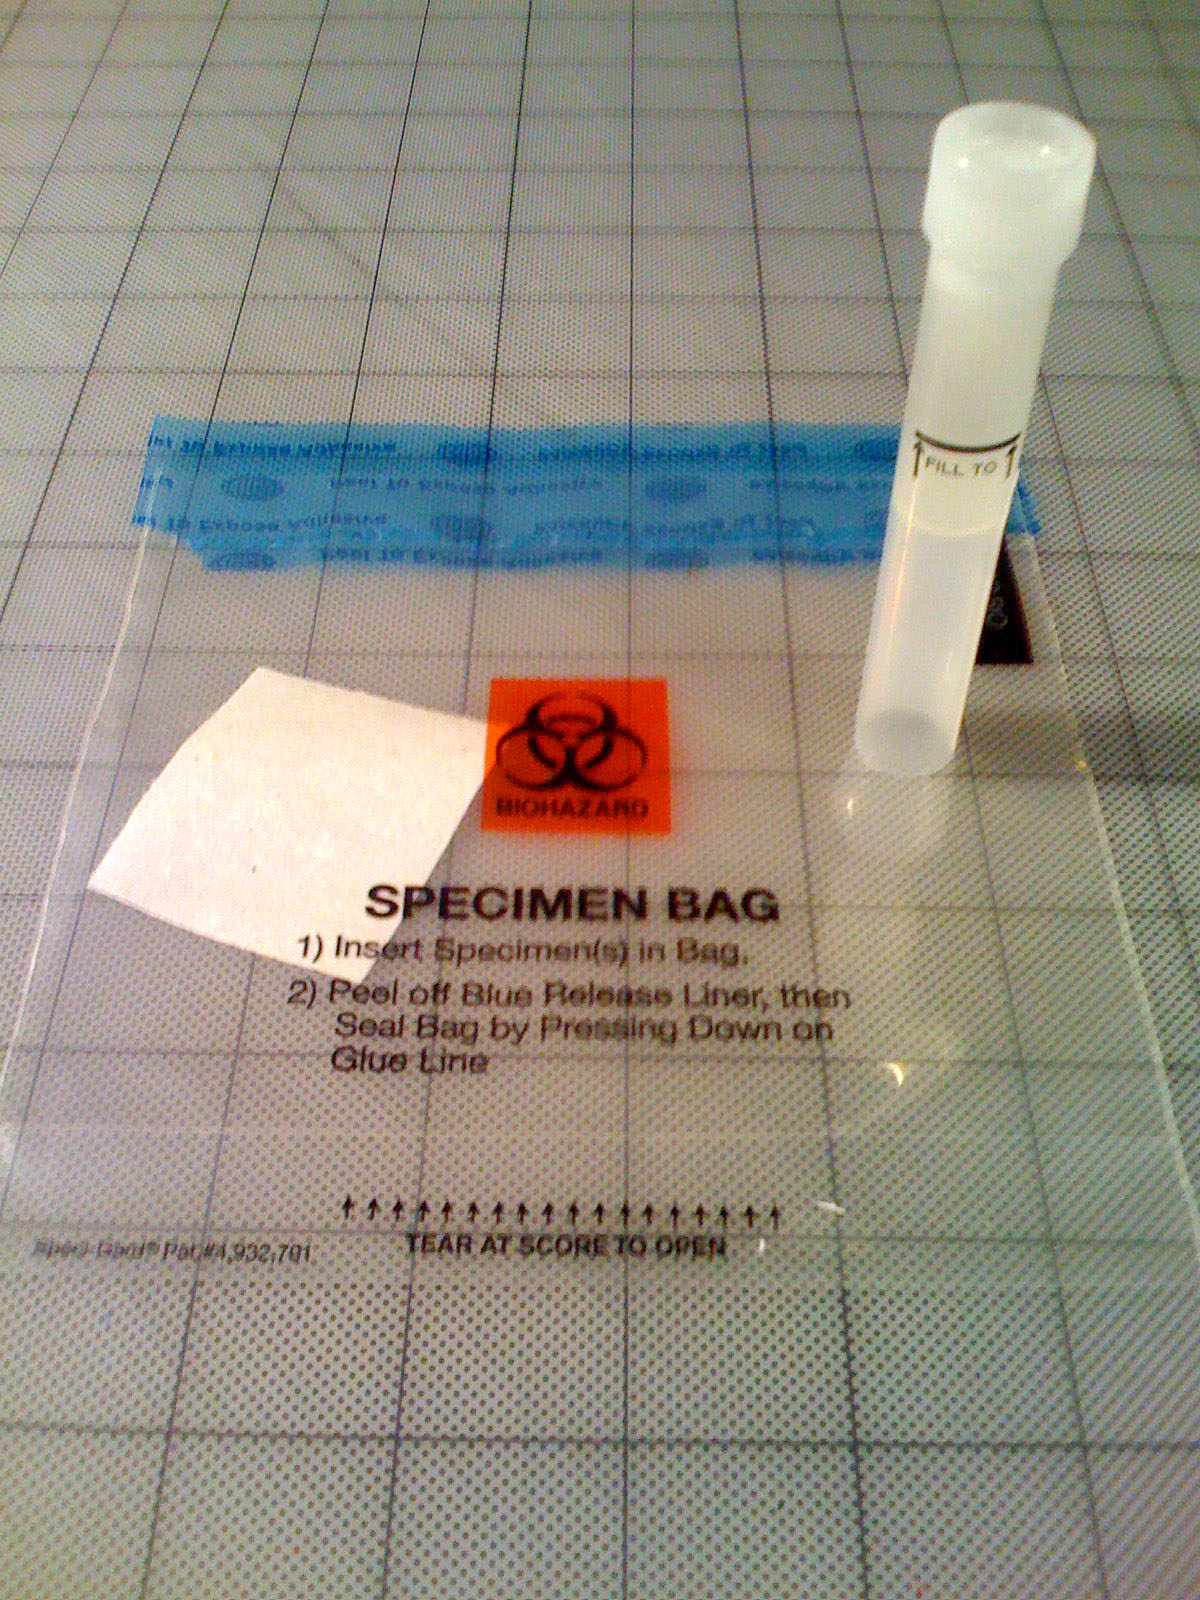 A DNA spit kit is shown, featuring a container and a specimen bag.